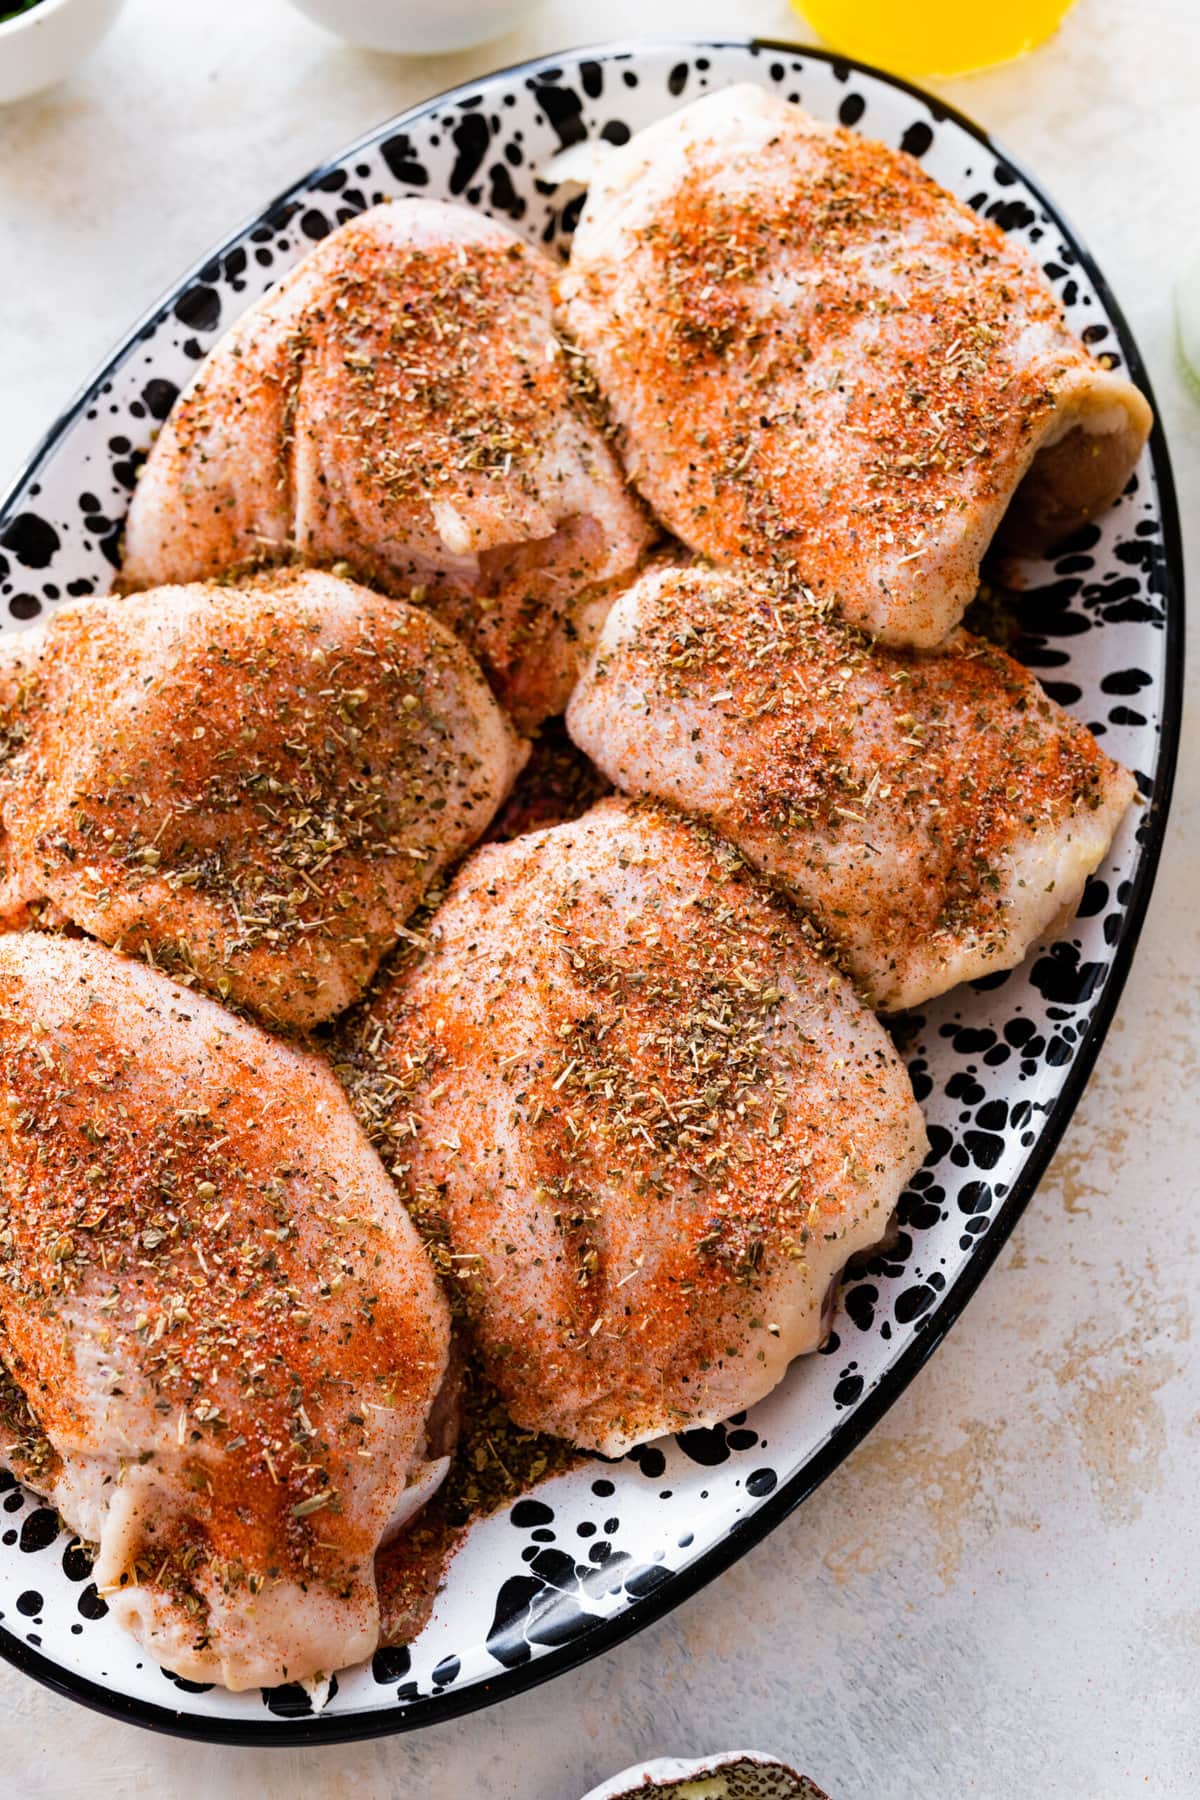 seasoned chicken thighs ready to cook.